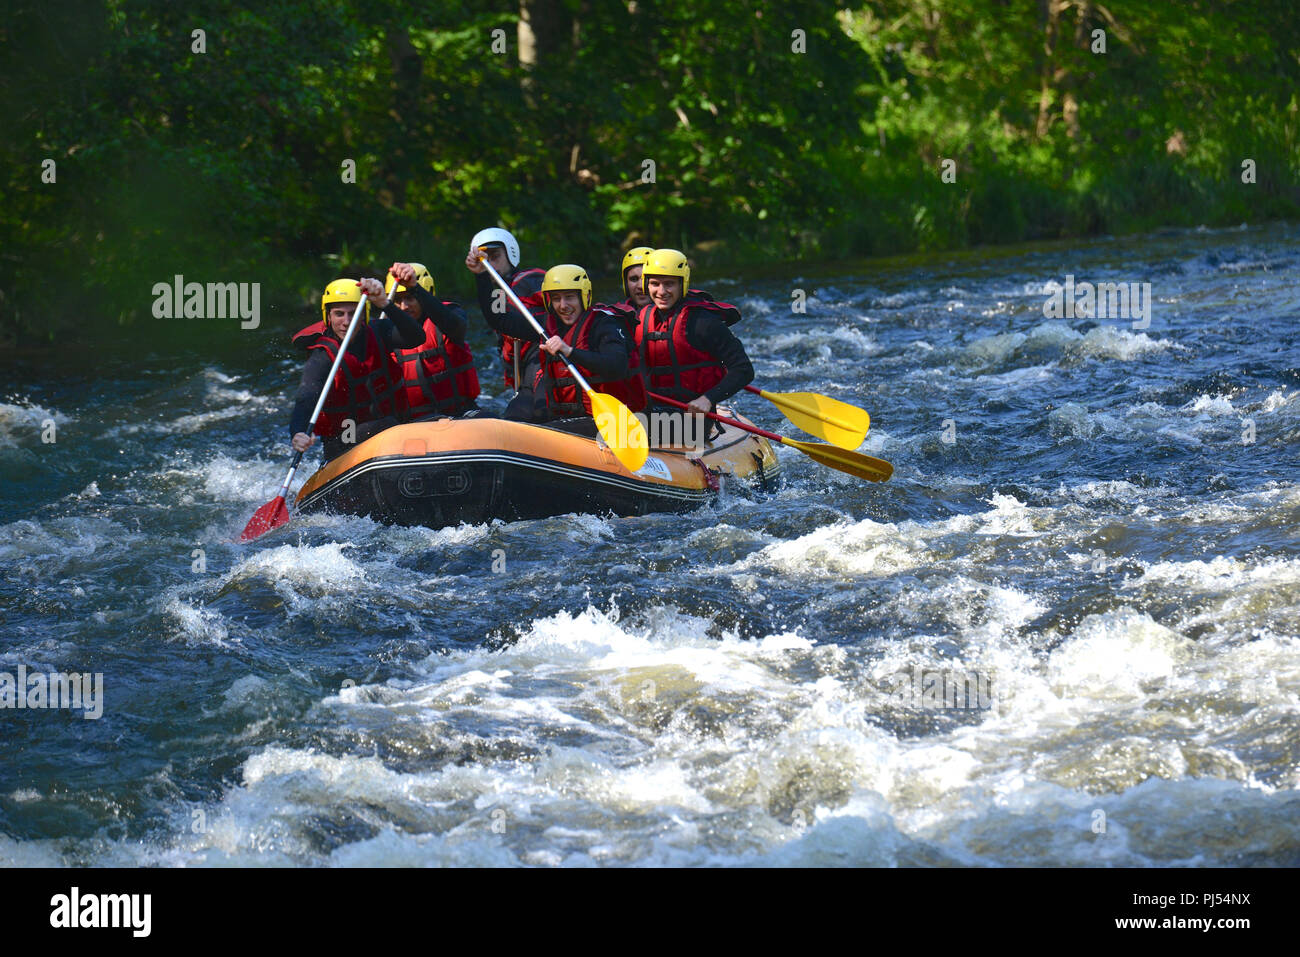 Rafting in the gorges of the Allier river from Monistrol-dÕAllier. Raft in the rapids Stock Photo